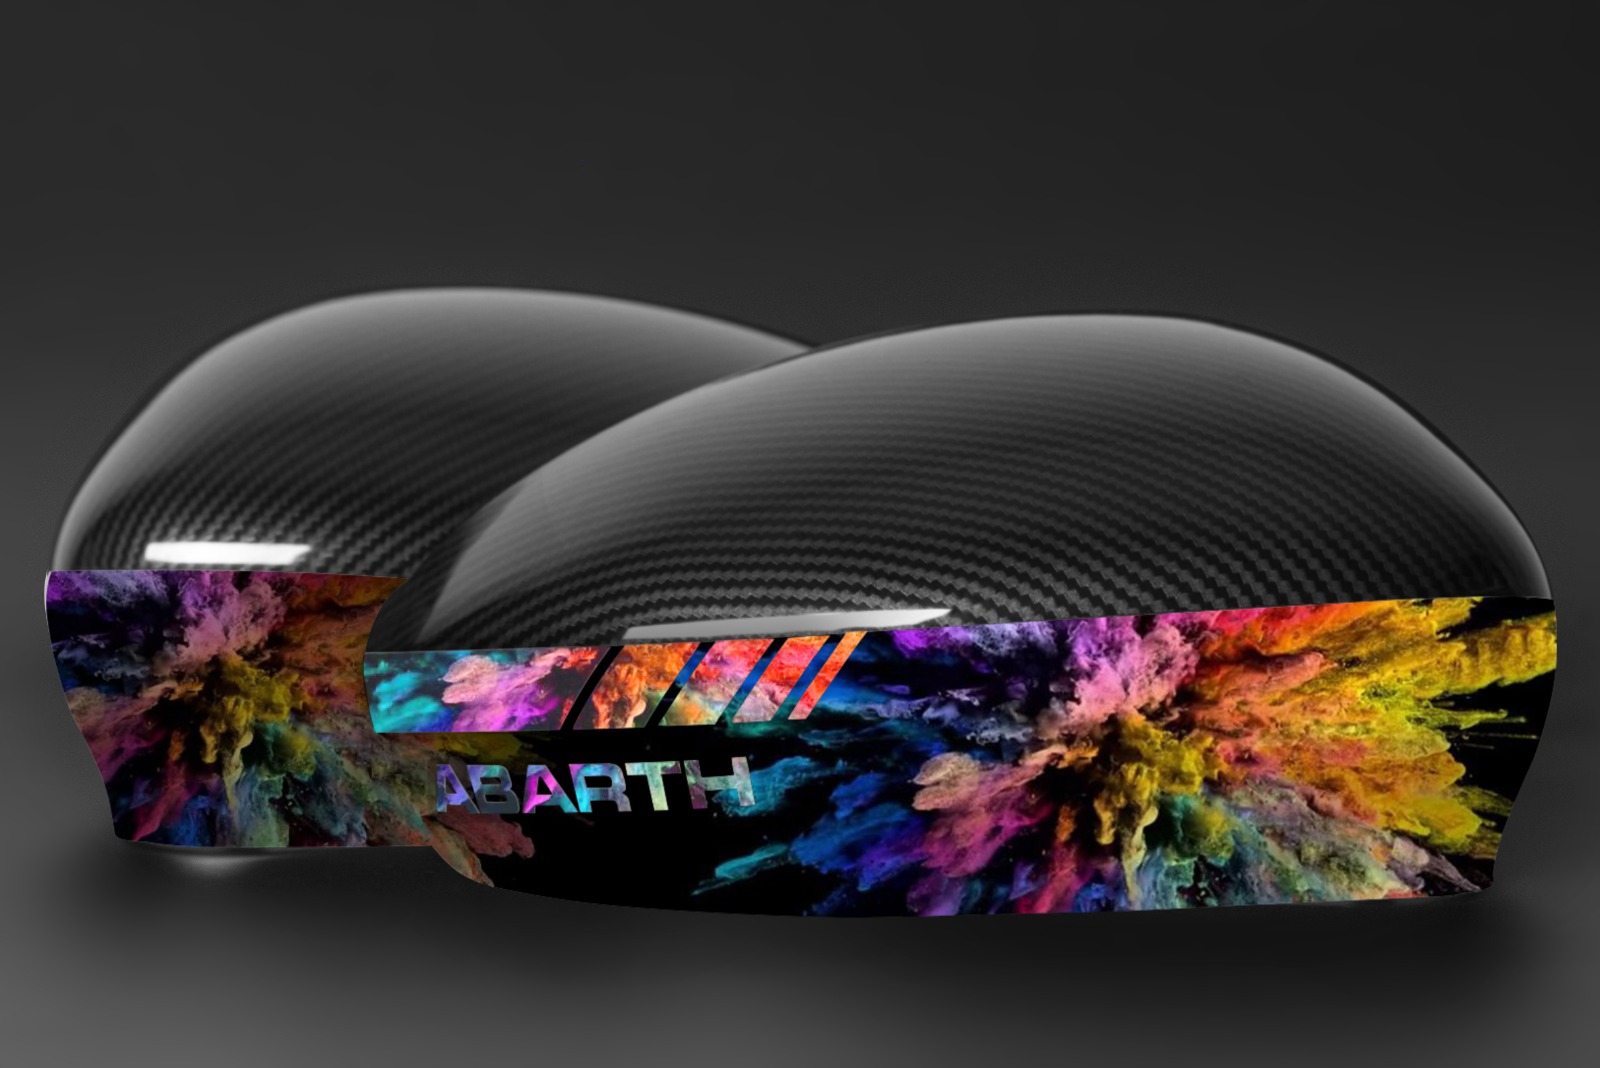 Abarth mirror caps with various colors. Pick yours!